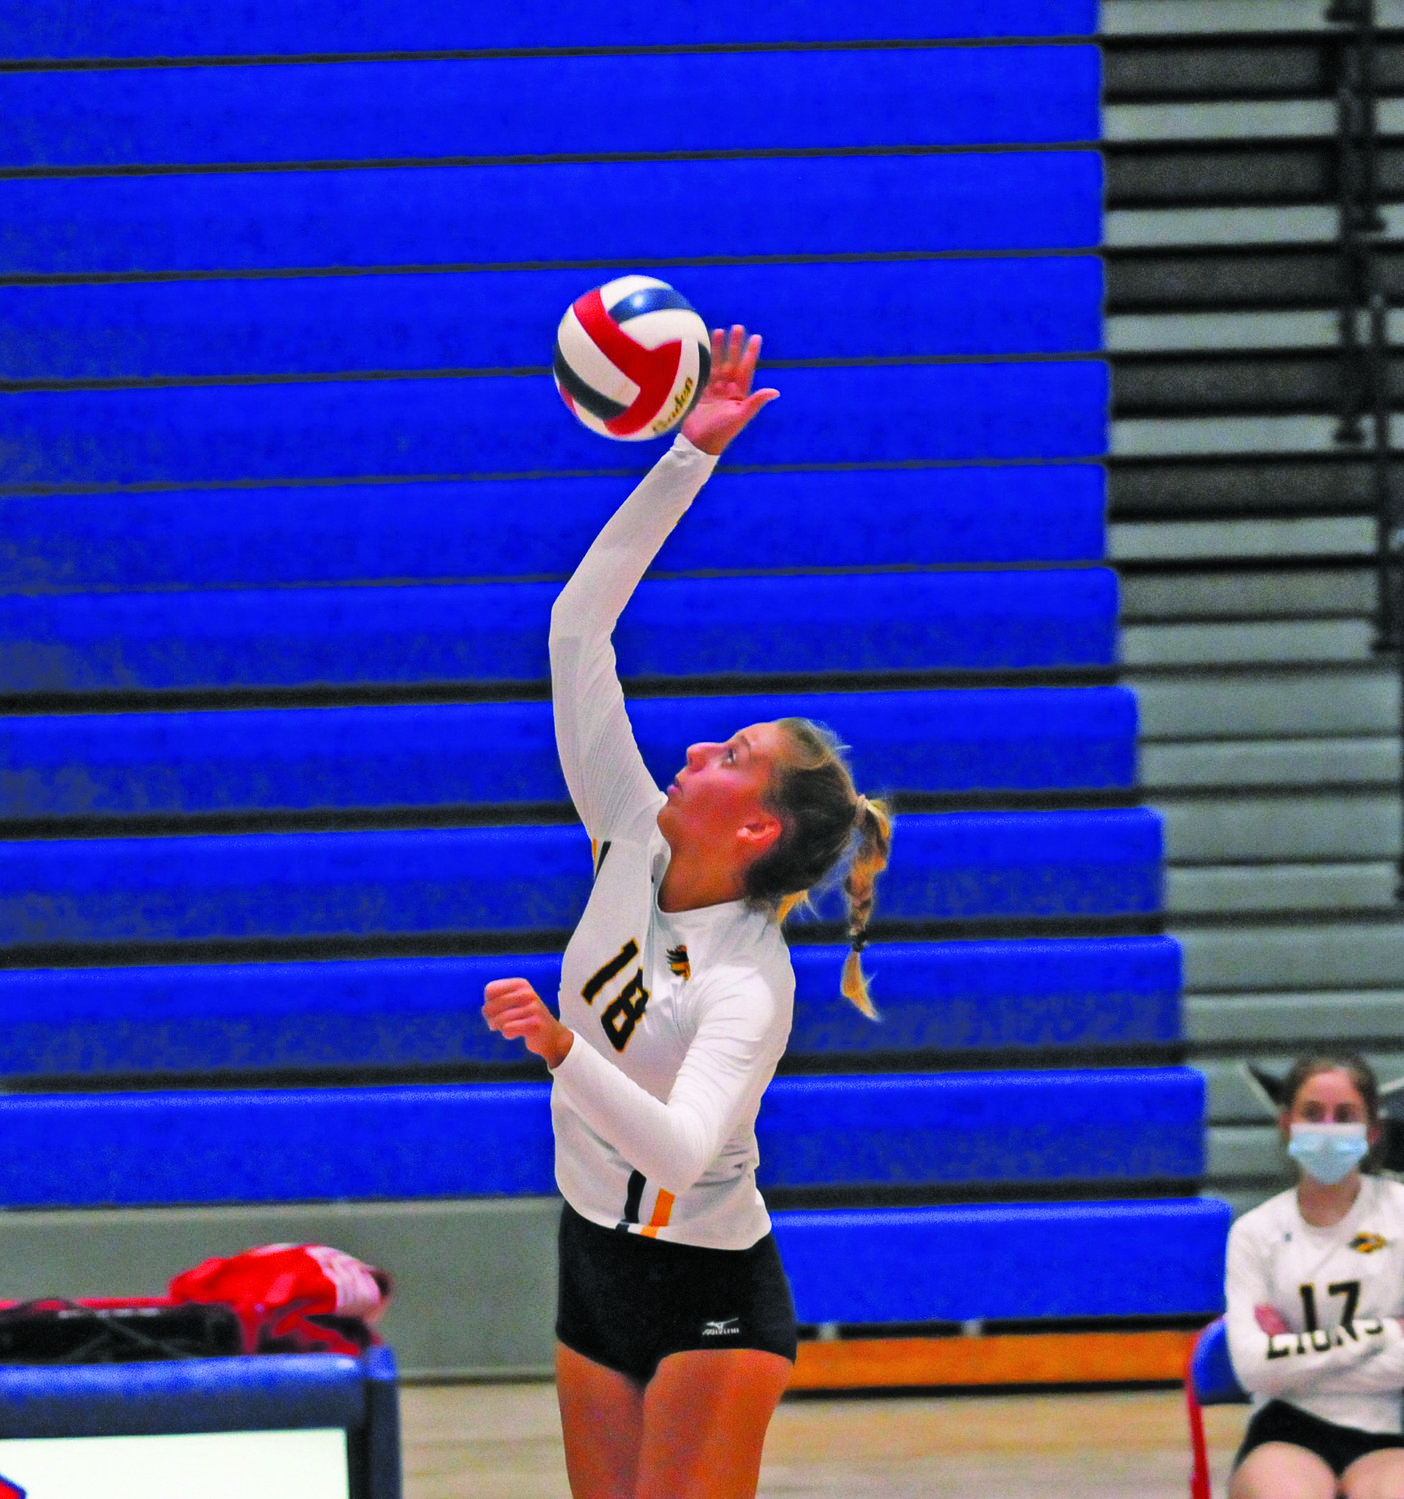 New Hope-Solebury junior Mia Chuma is an outside hitter for the Lions. Here she is in a girls volleyball match Sept. 15 at Neshaminy High School.